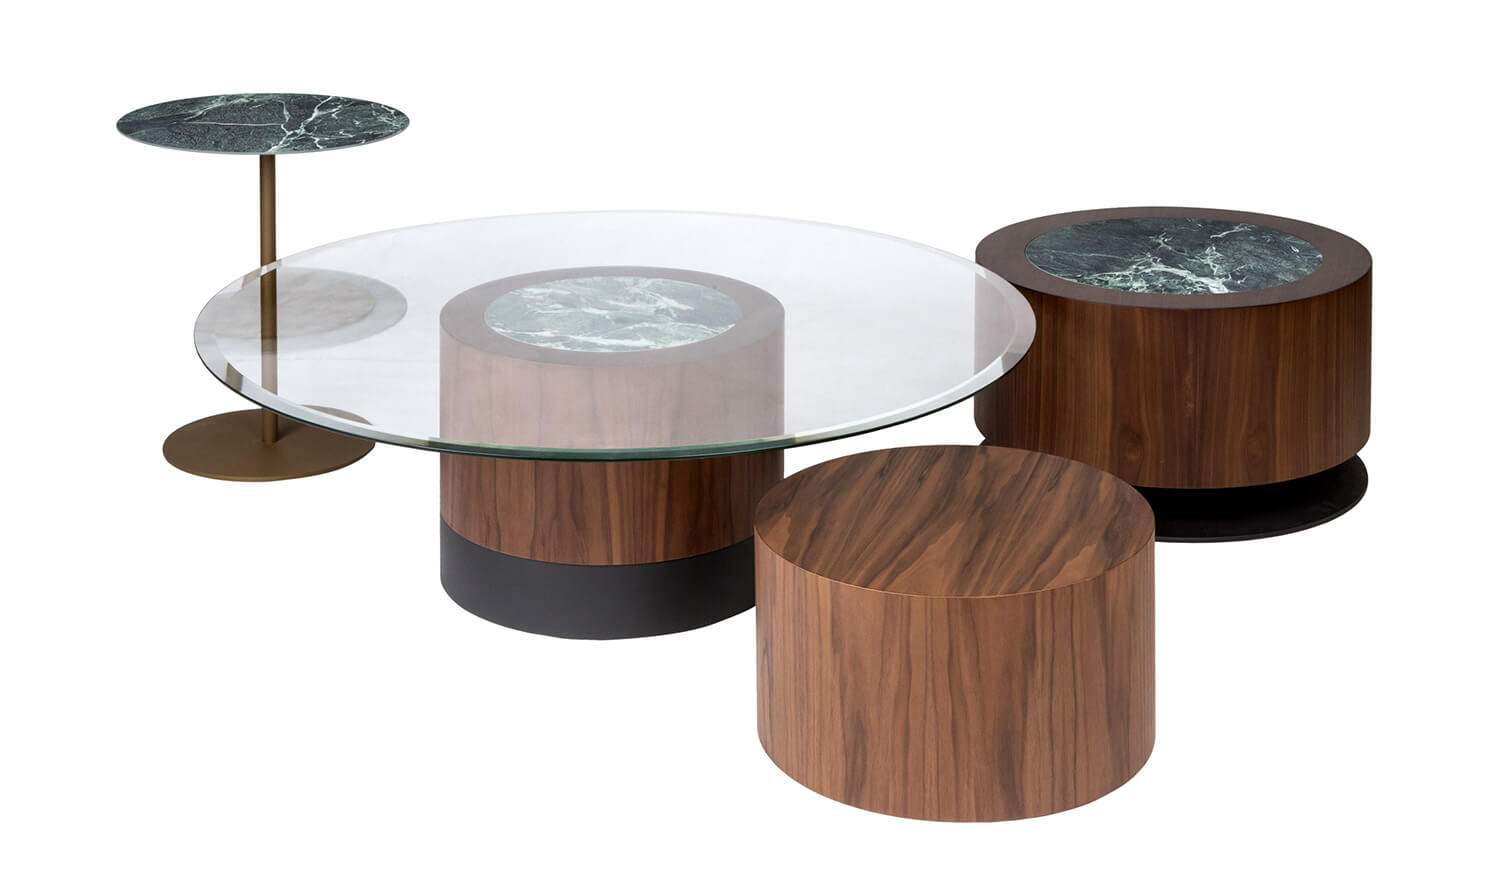 W-moon collection of low tables